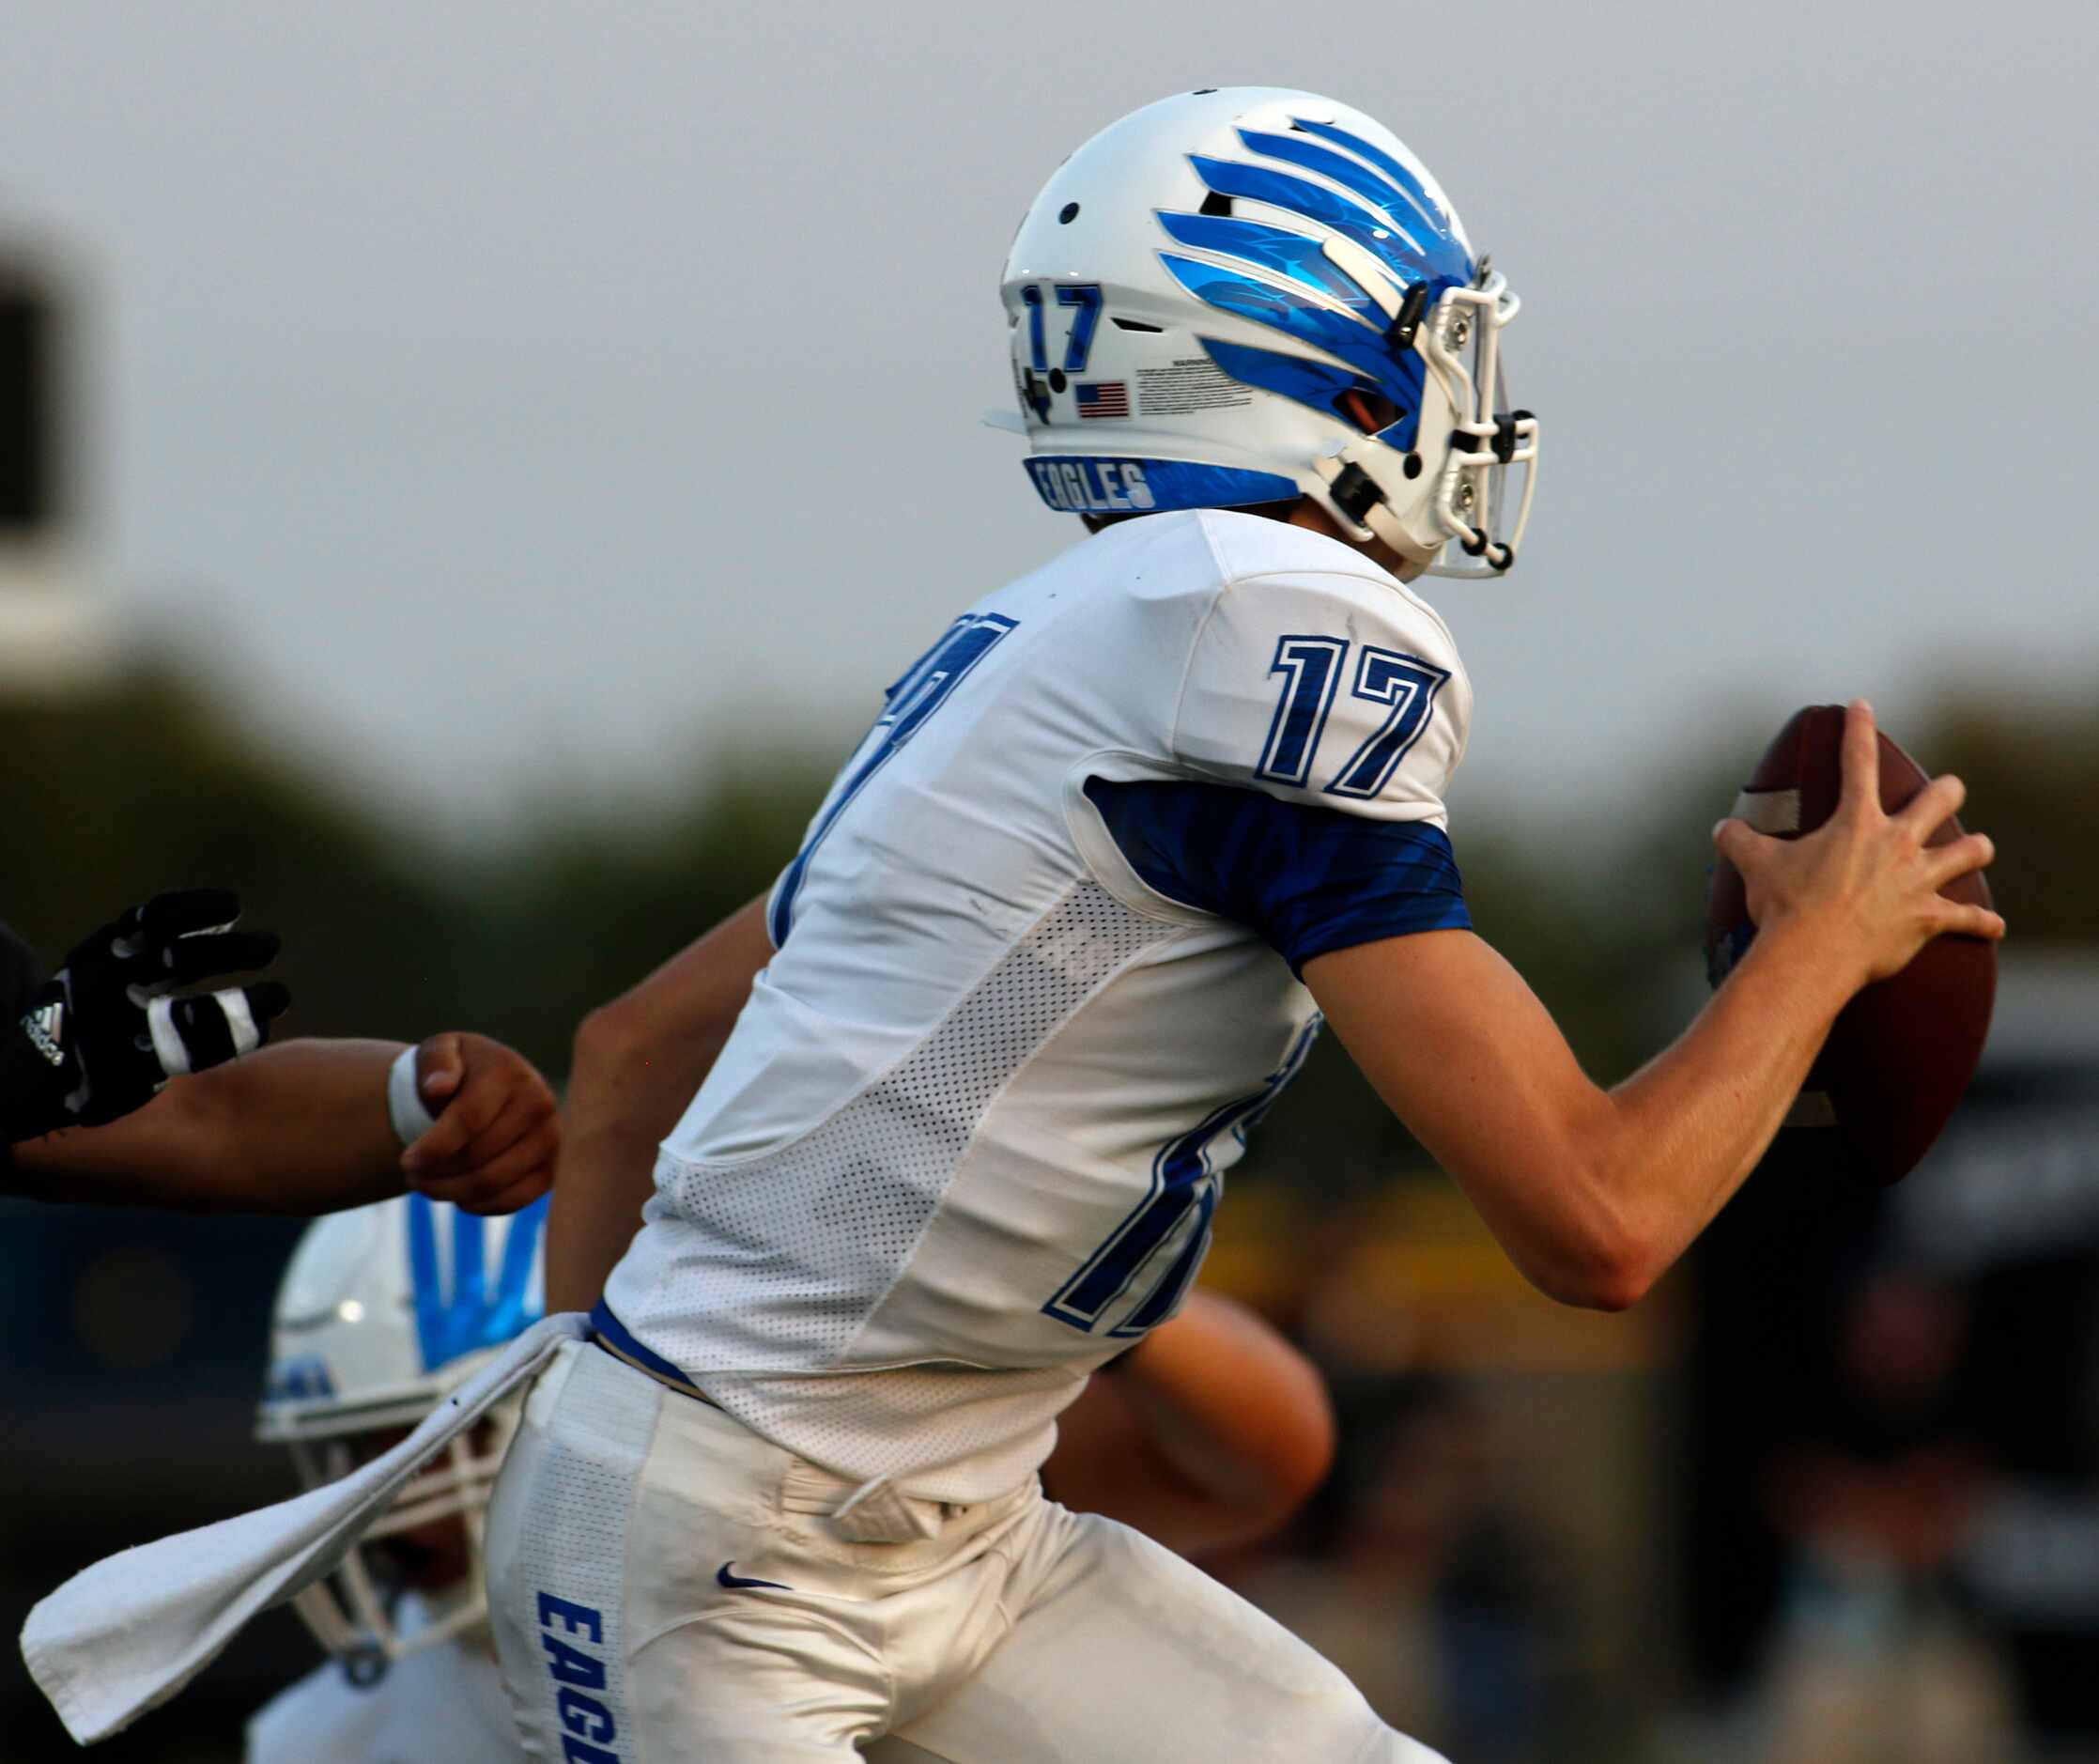 Lindale quarterback Sam Peterson (17) scrambles out of the grasp of a Kaufman defender as he...